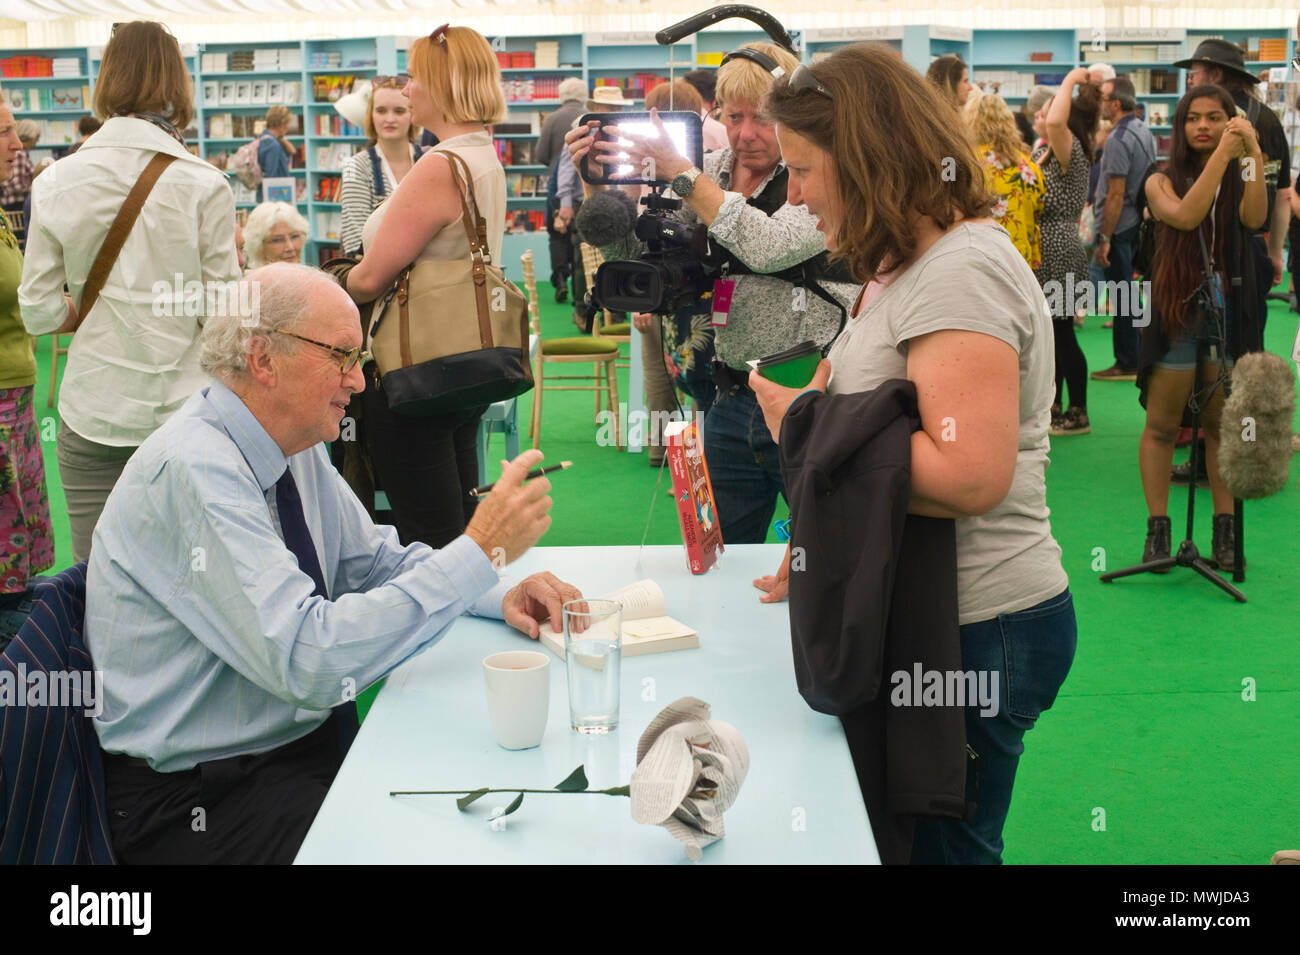 Alexander McCall Smith signing books for fans in the bookshop at Hay Festival 2018 Hay-on-Wye Powys Wales UK Stock Photo